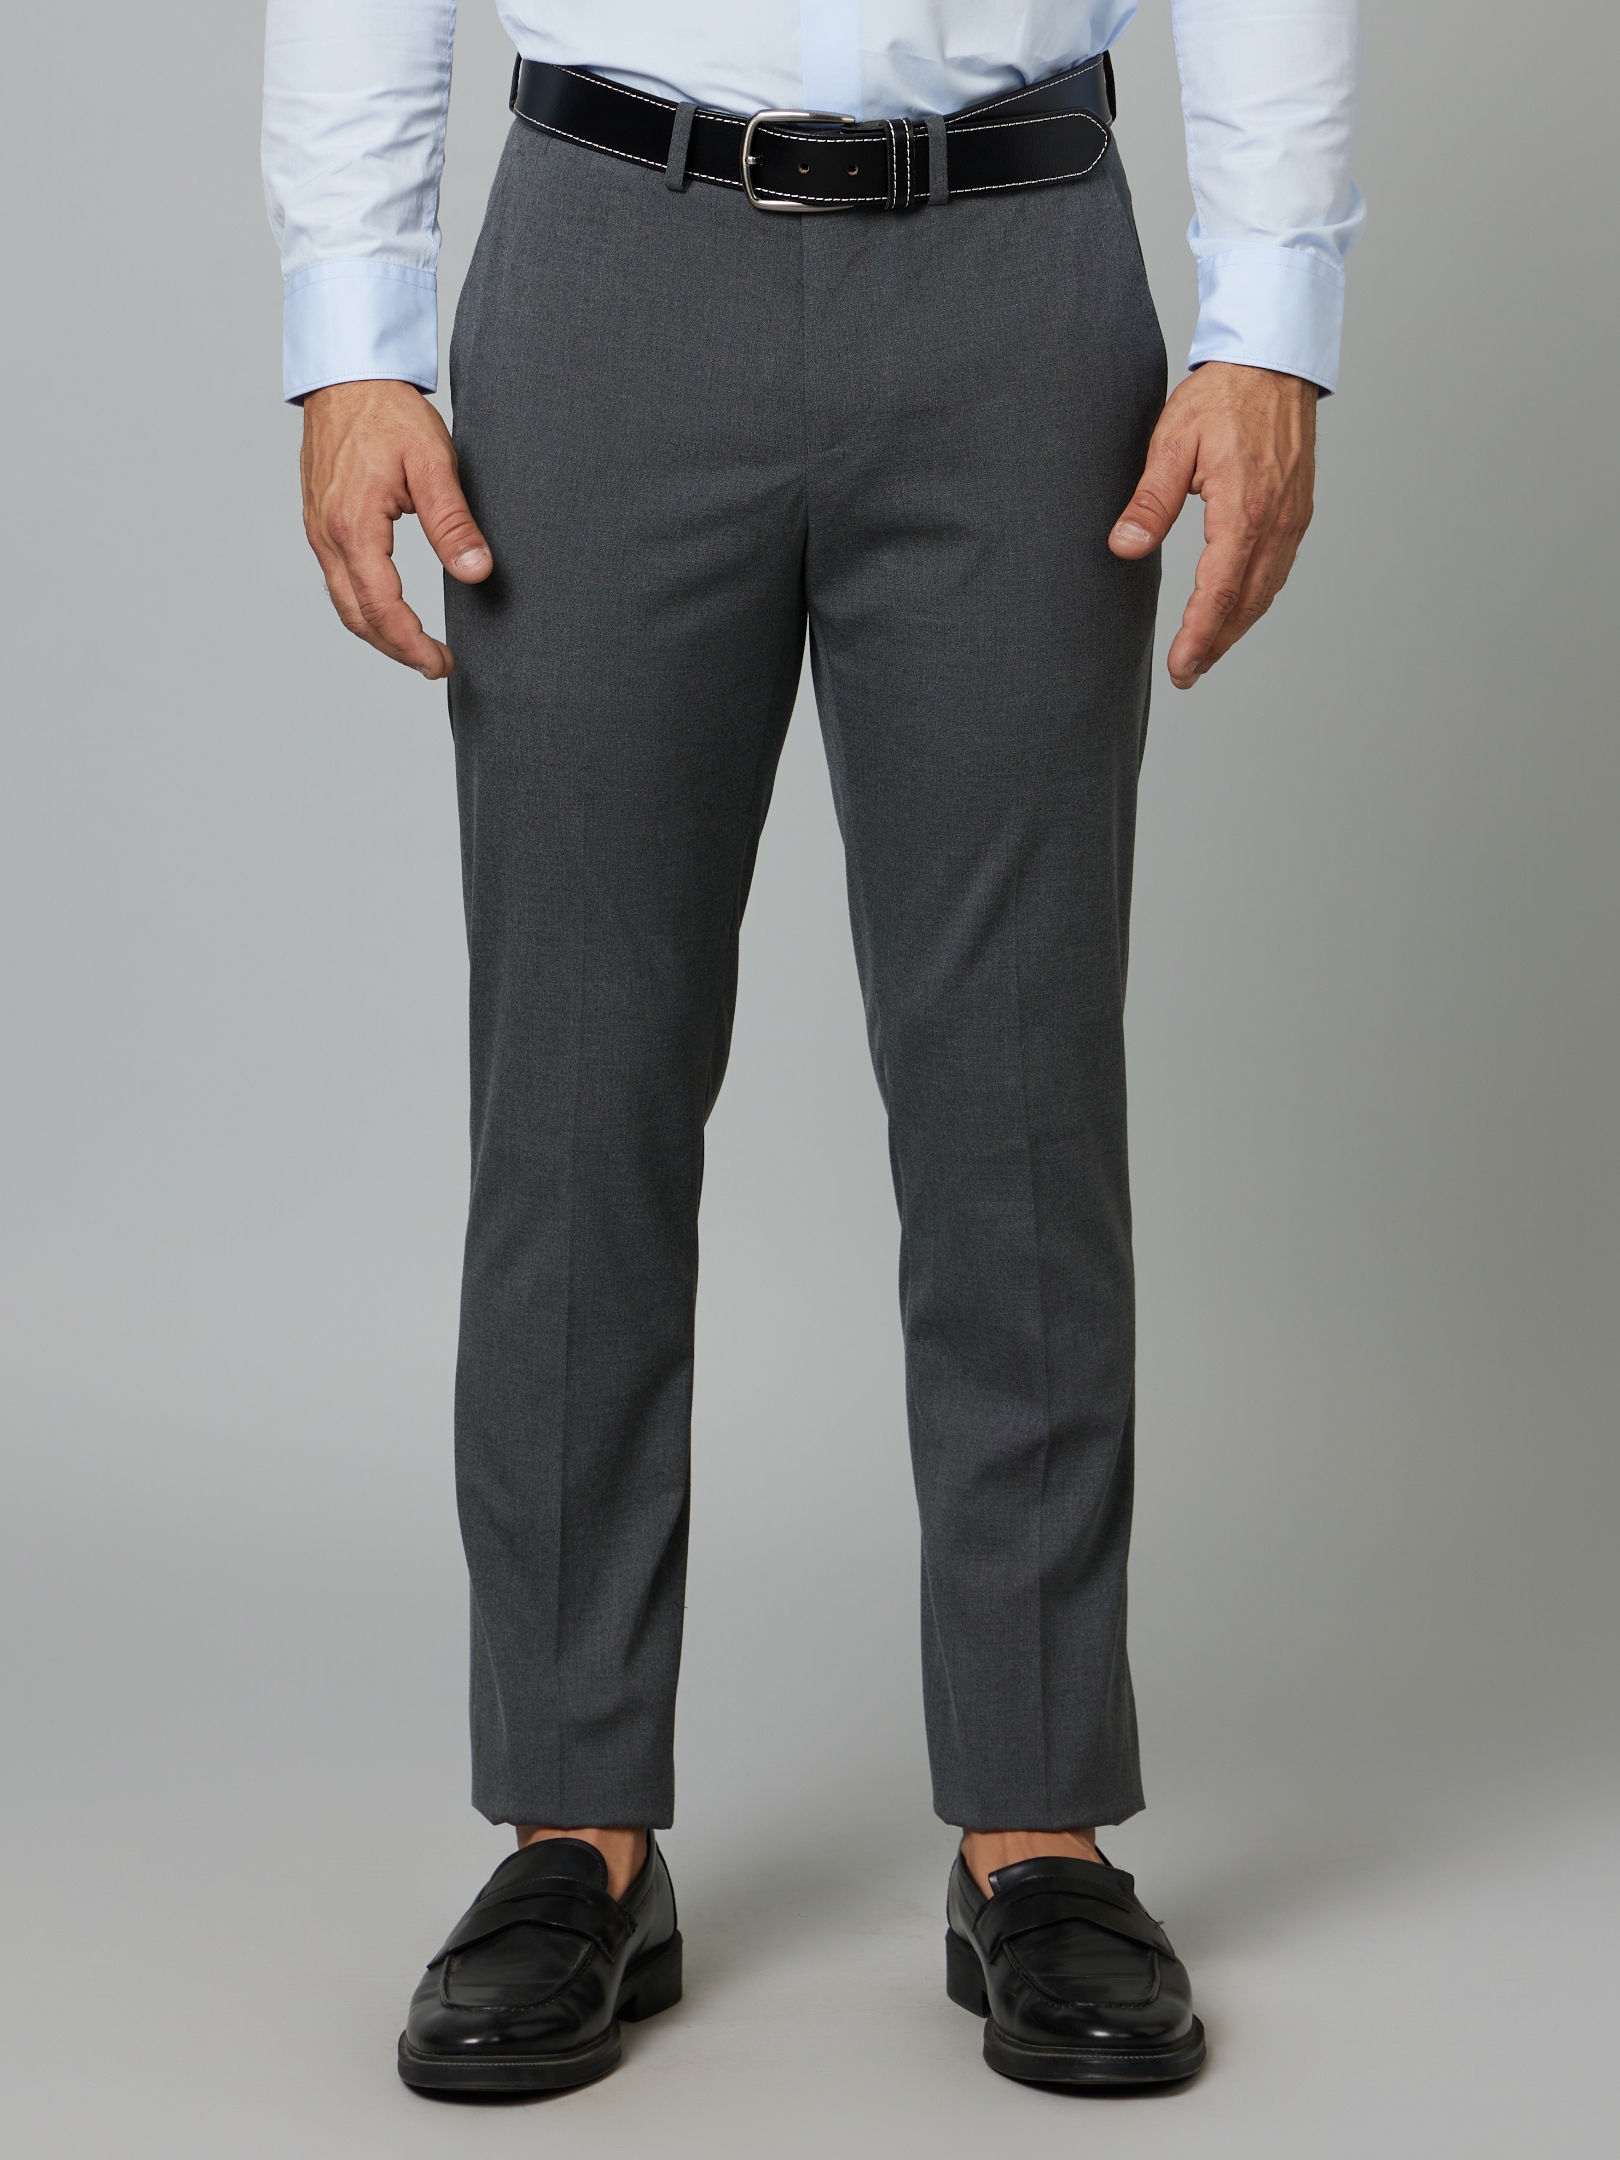 Men's Grey Polyester Solid Formal Trousers